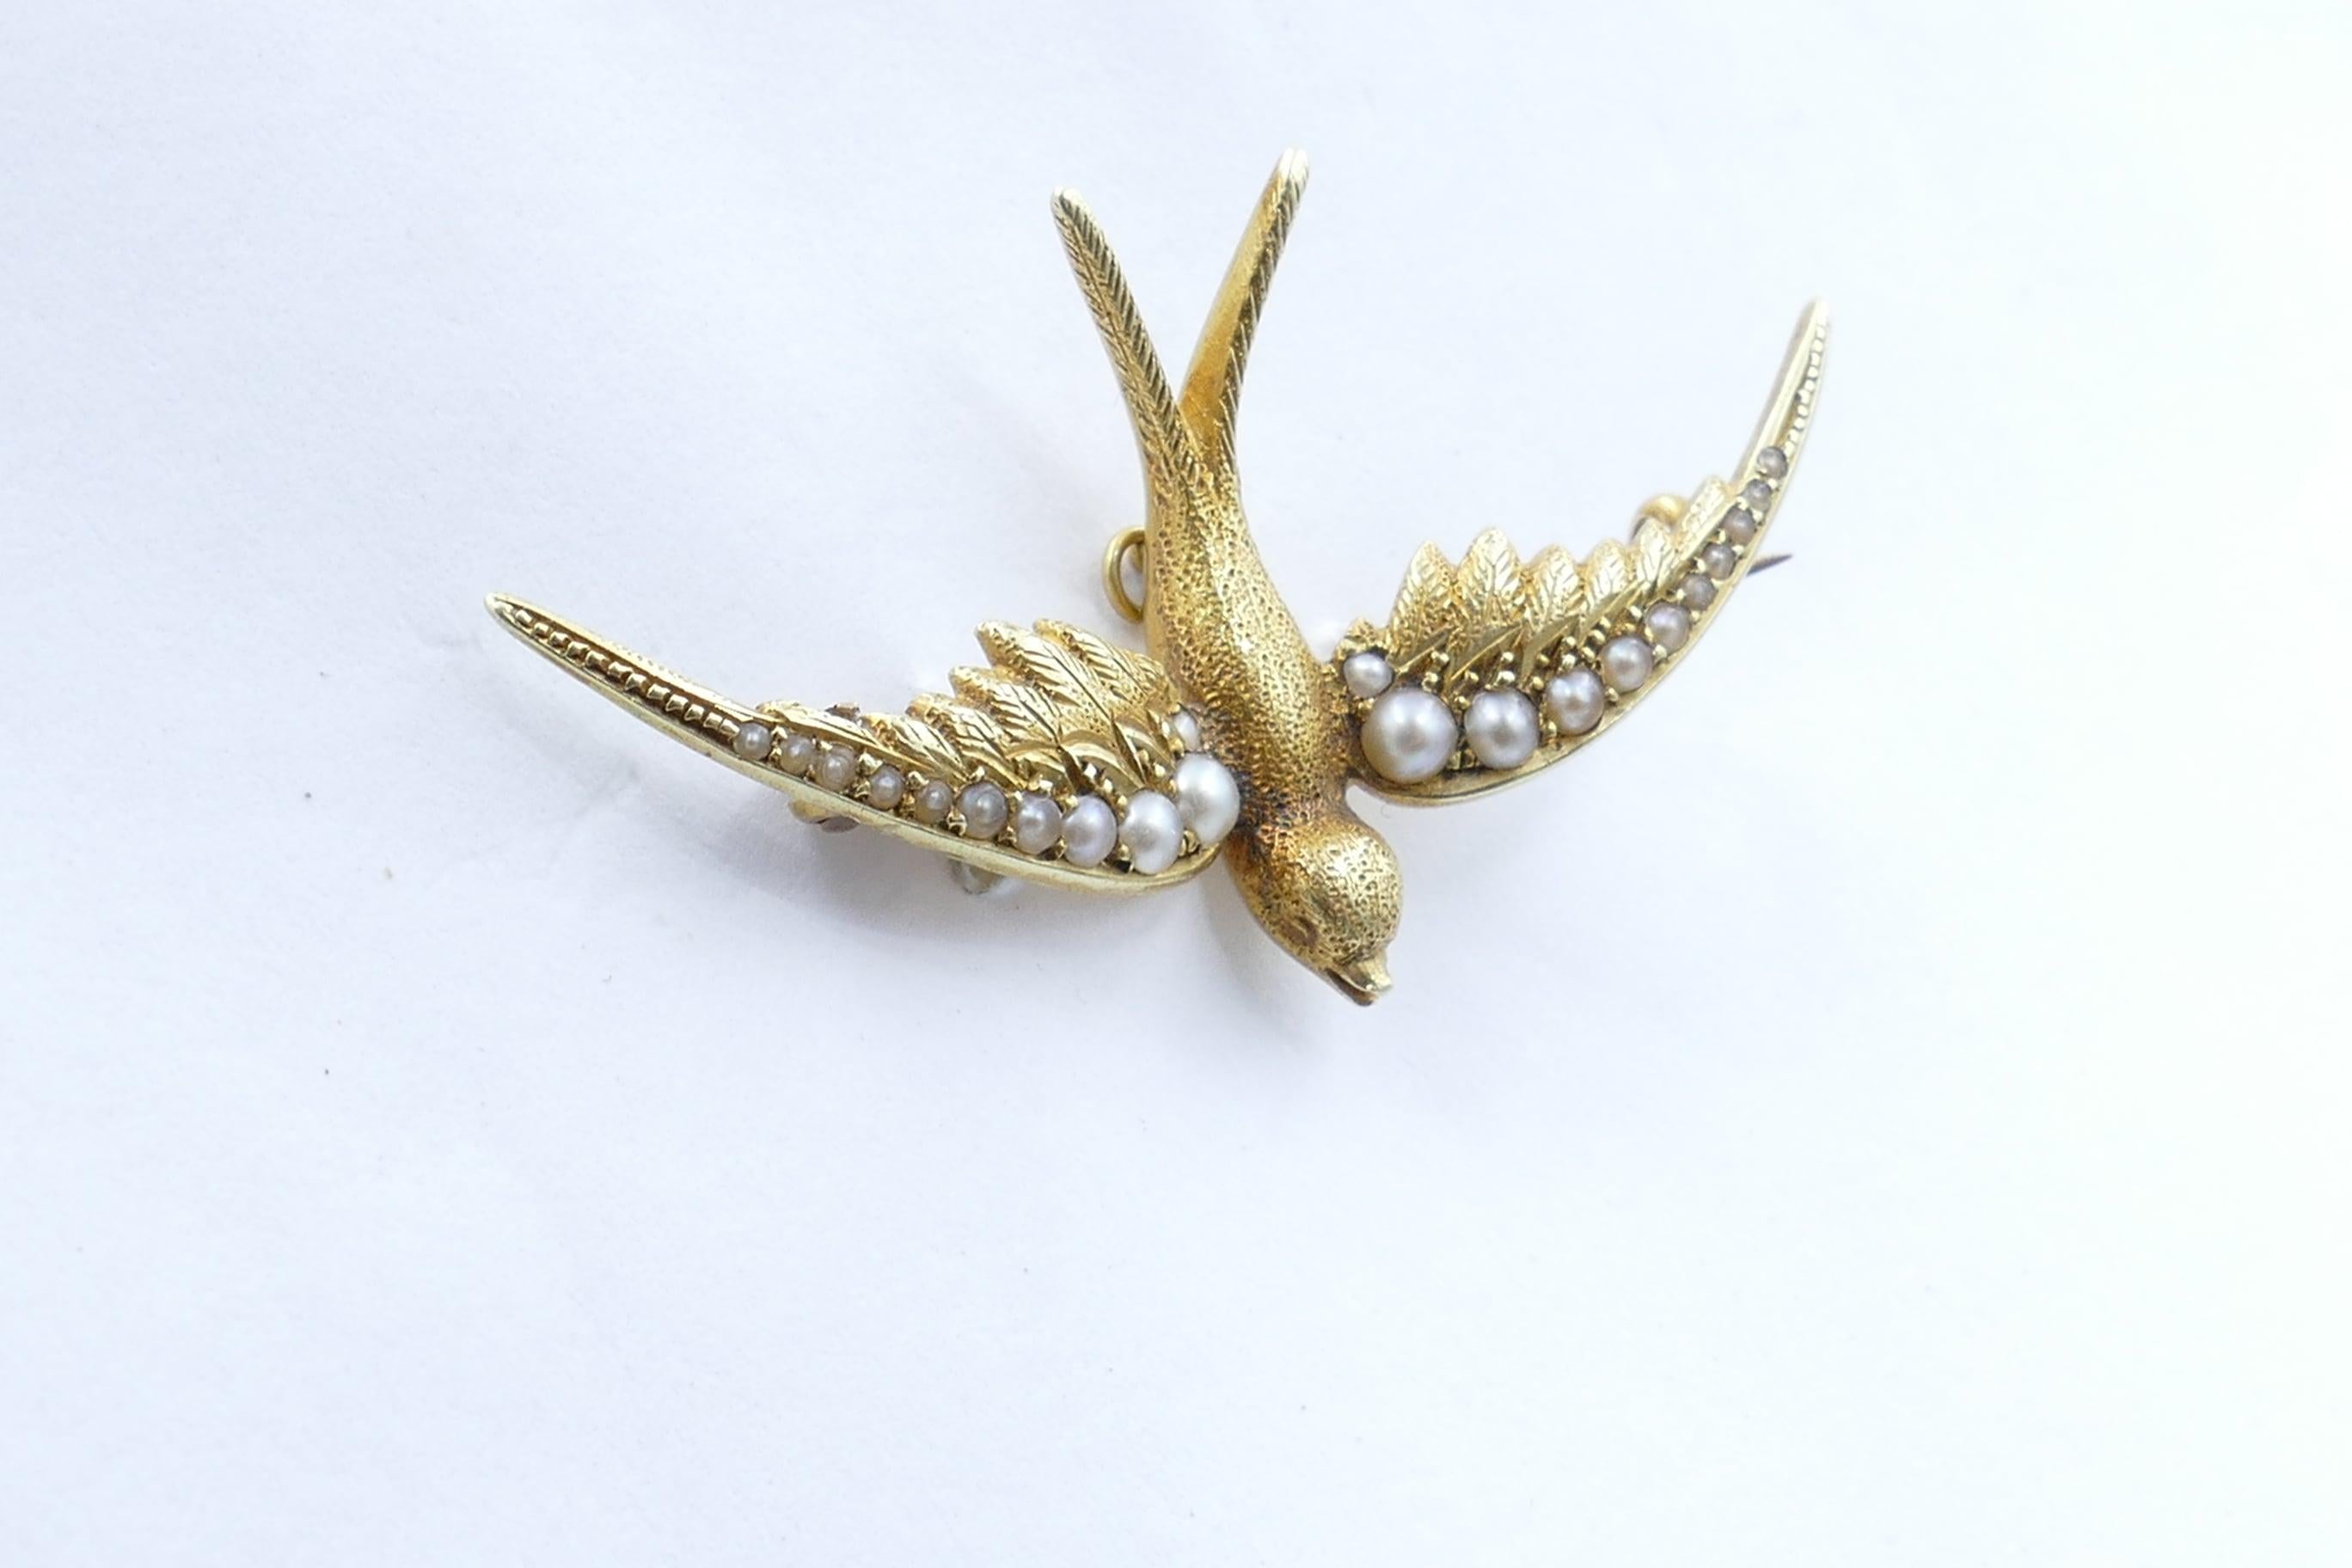 22 round silver/white Seed Pearls embellish this lovely Brooch graduating in from the outer wings.
The Brooch is in the form of a Sparrow in flight & measures 25mm to 45mm and it has a C clasp closure & pin.
Total Item weight 4.13 grams
Method of